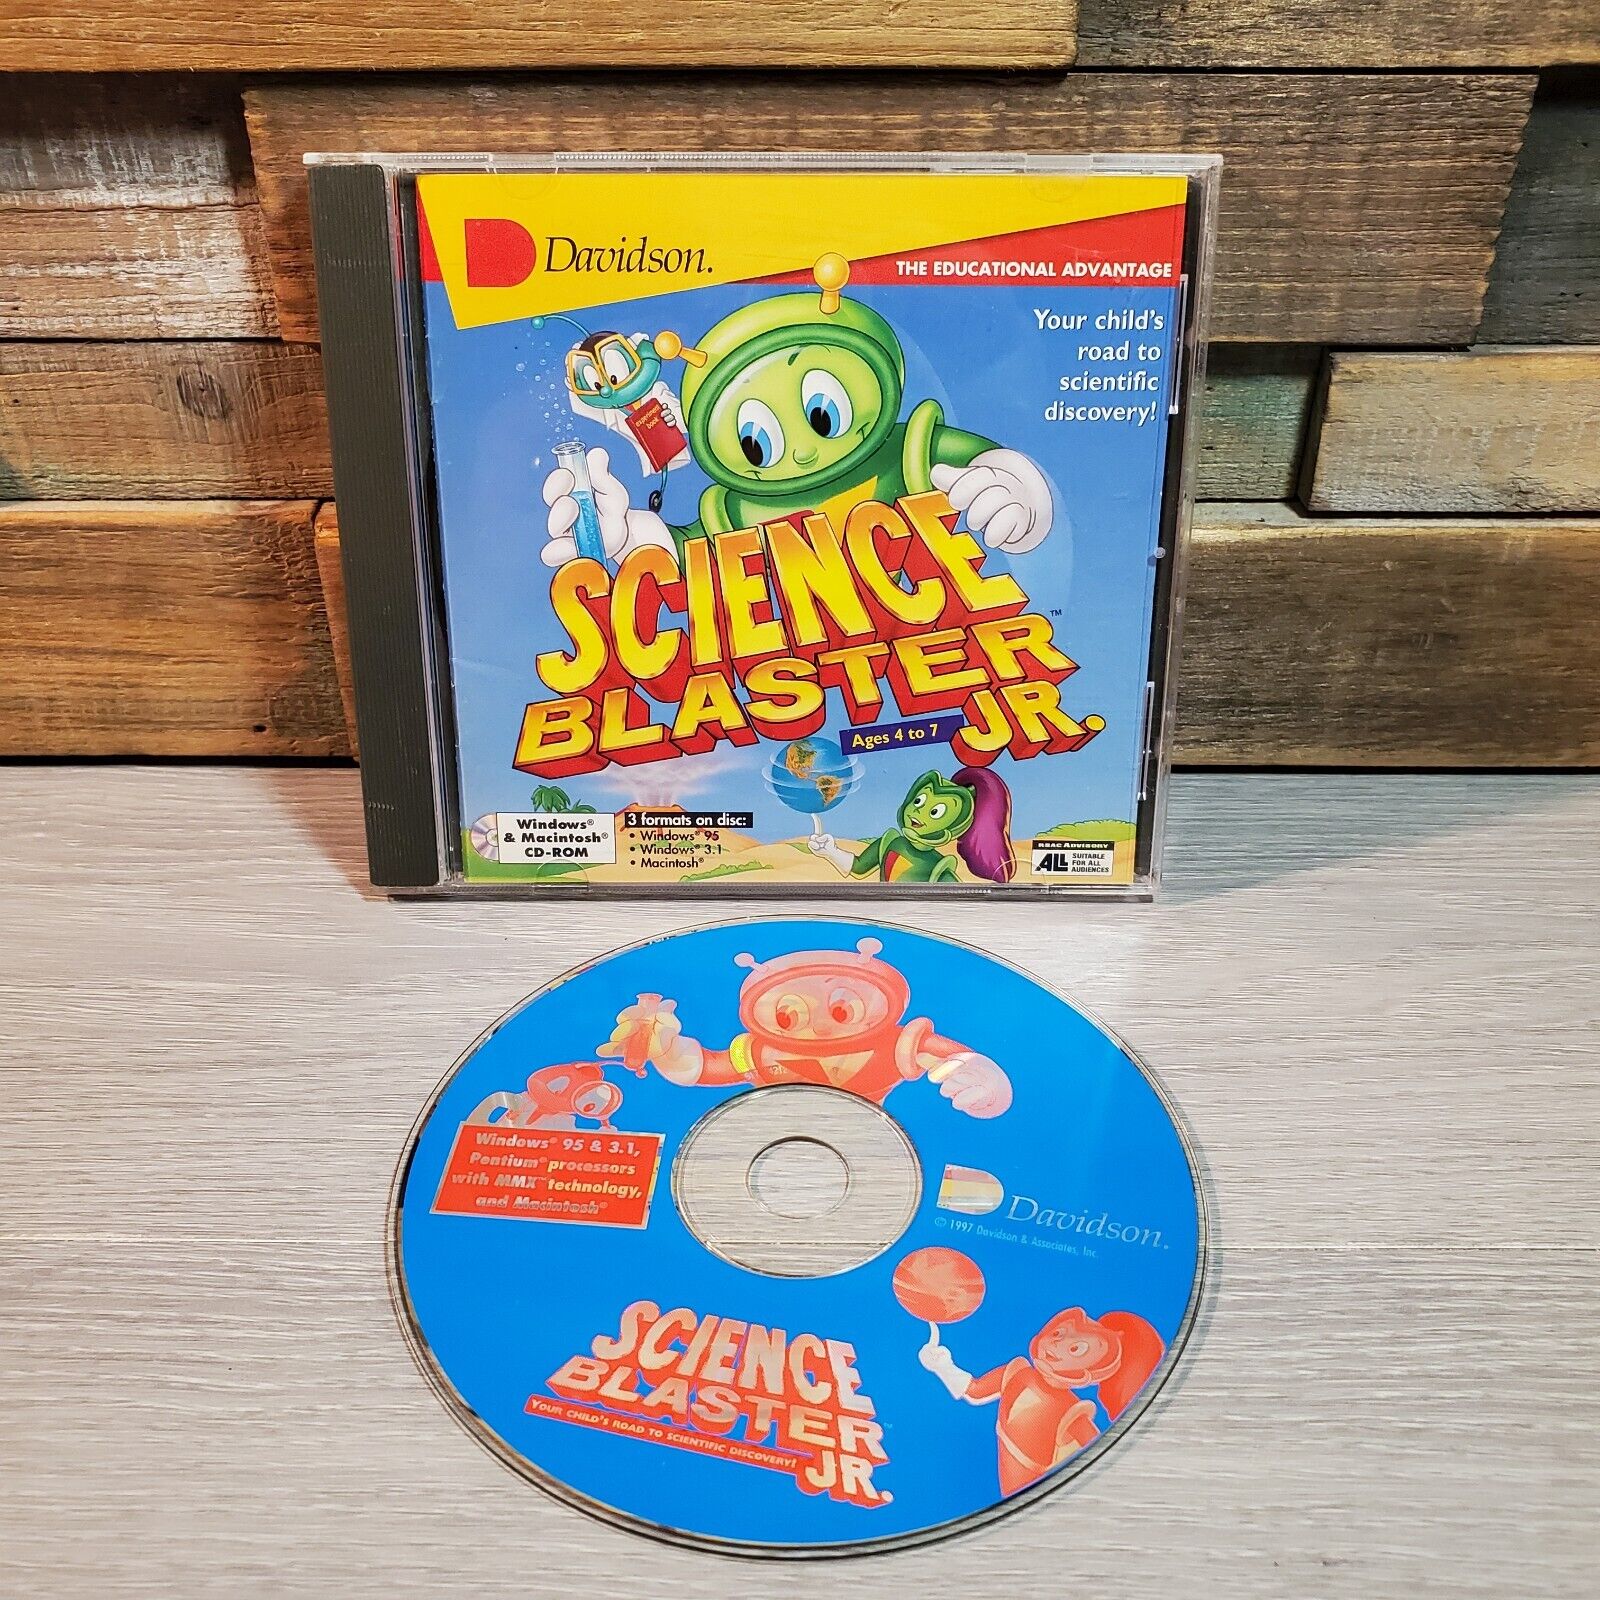 Davidson Science Blaster Jr CD-ROM PC Win Mac Ages 4-7 Scientific Discovery 1997